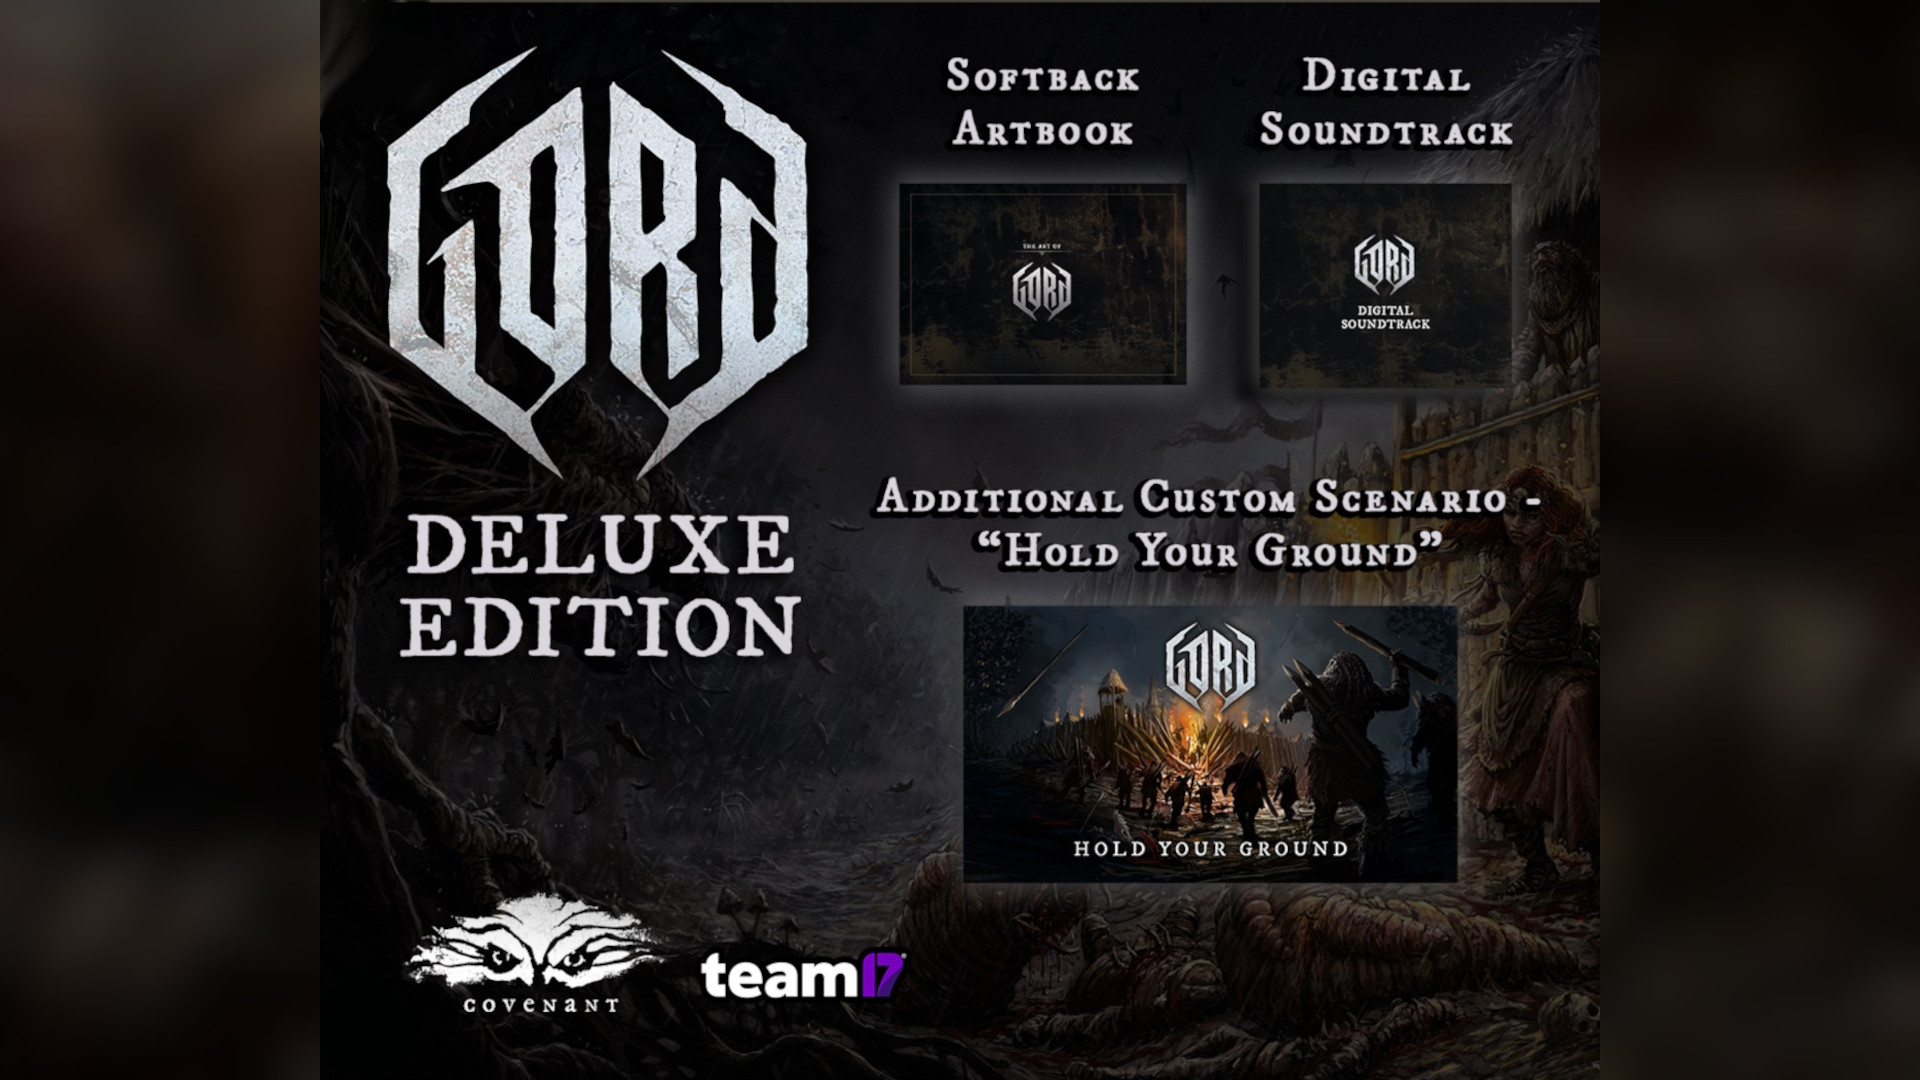 Gord Deluxe Edition Steam CD Key 17.48 USD